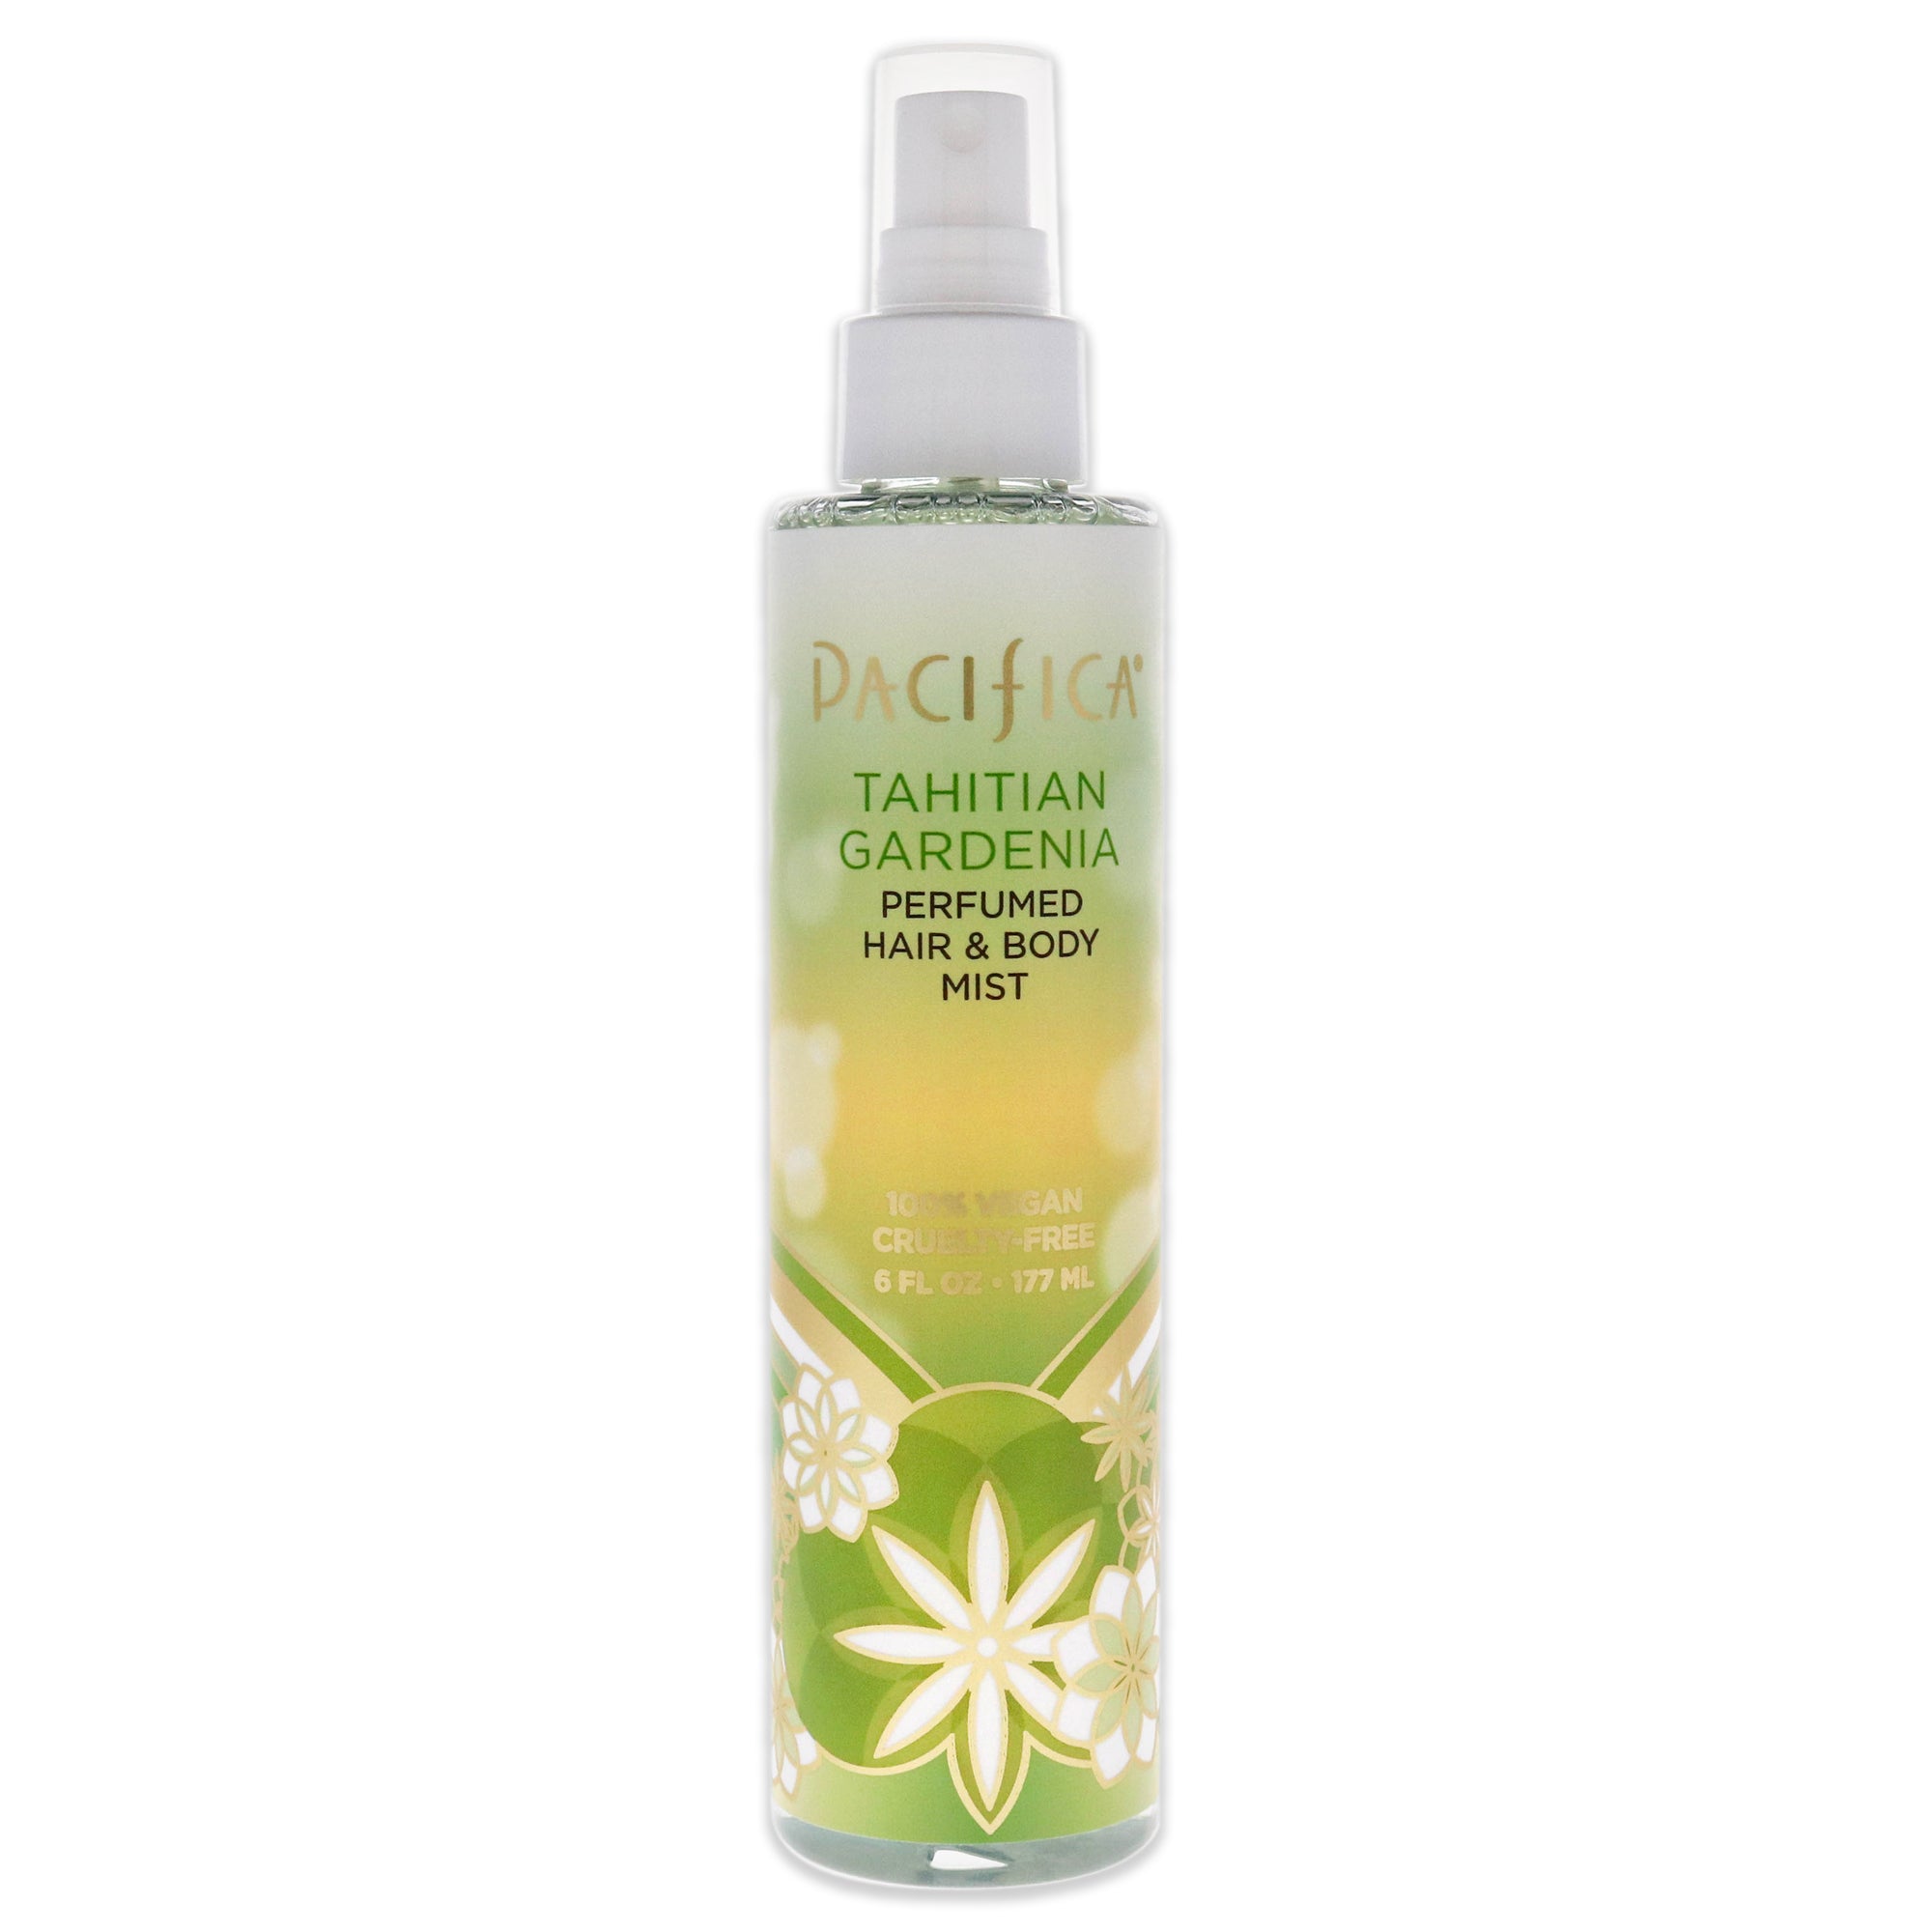 Perfumed Hair and Body Mist - Tahitian Gardenia by Pacifica for Women - 6 oz Body Mist